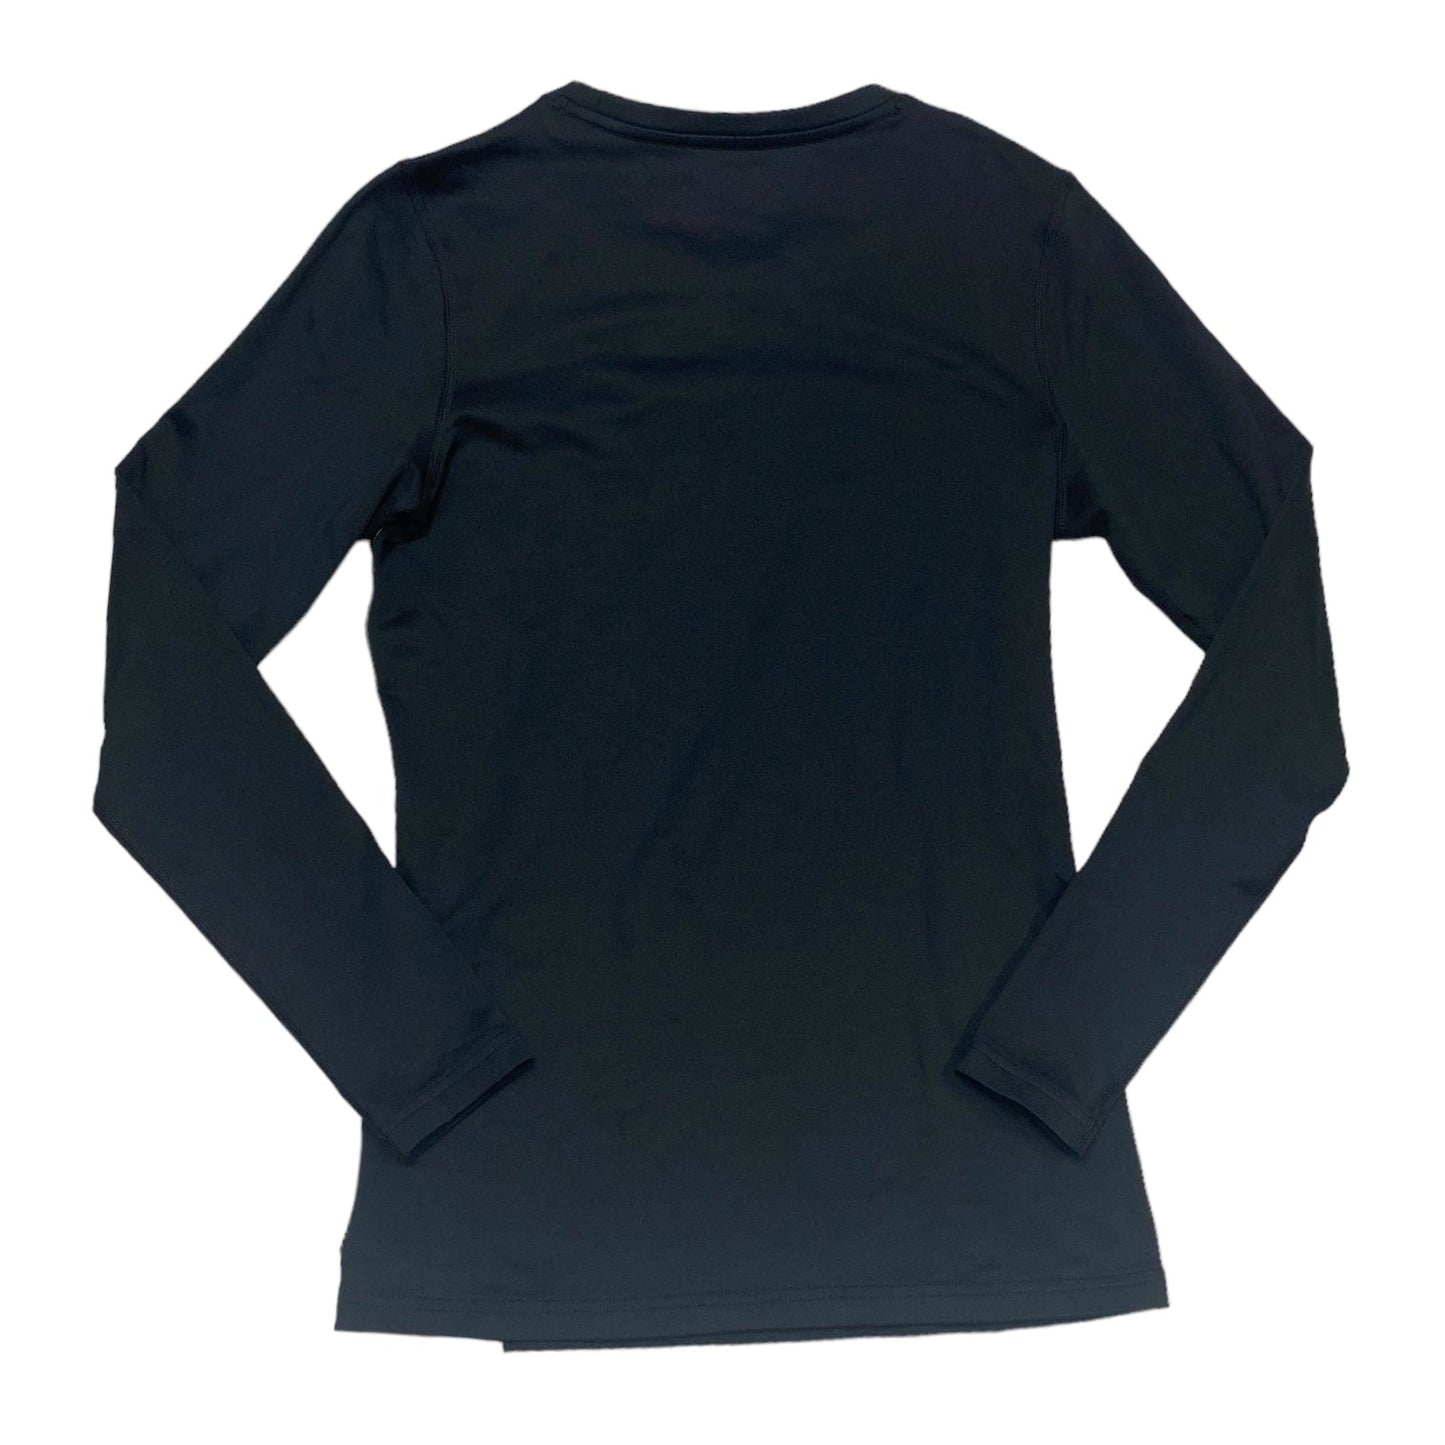 Black Athletic Top Long Sleeve Collar Under Armour, Size S